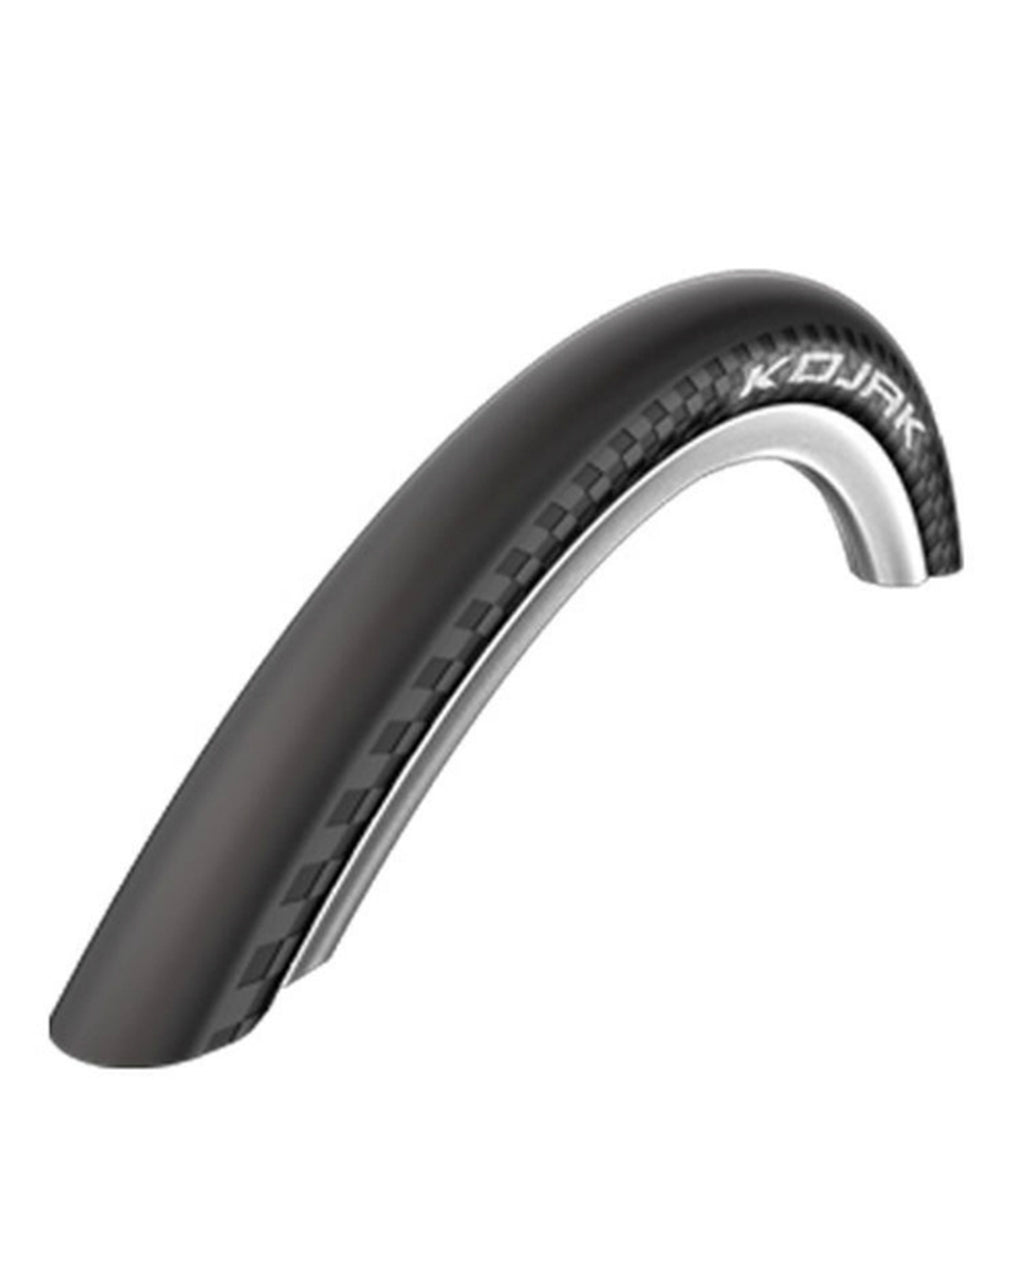 Schwalbe Kojak Tan/ Black Outer Tyre 16" 349 1/4 (Brompton/ Trifold/ Pikes/ 3Sixty/ Avro)